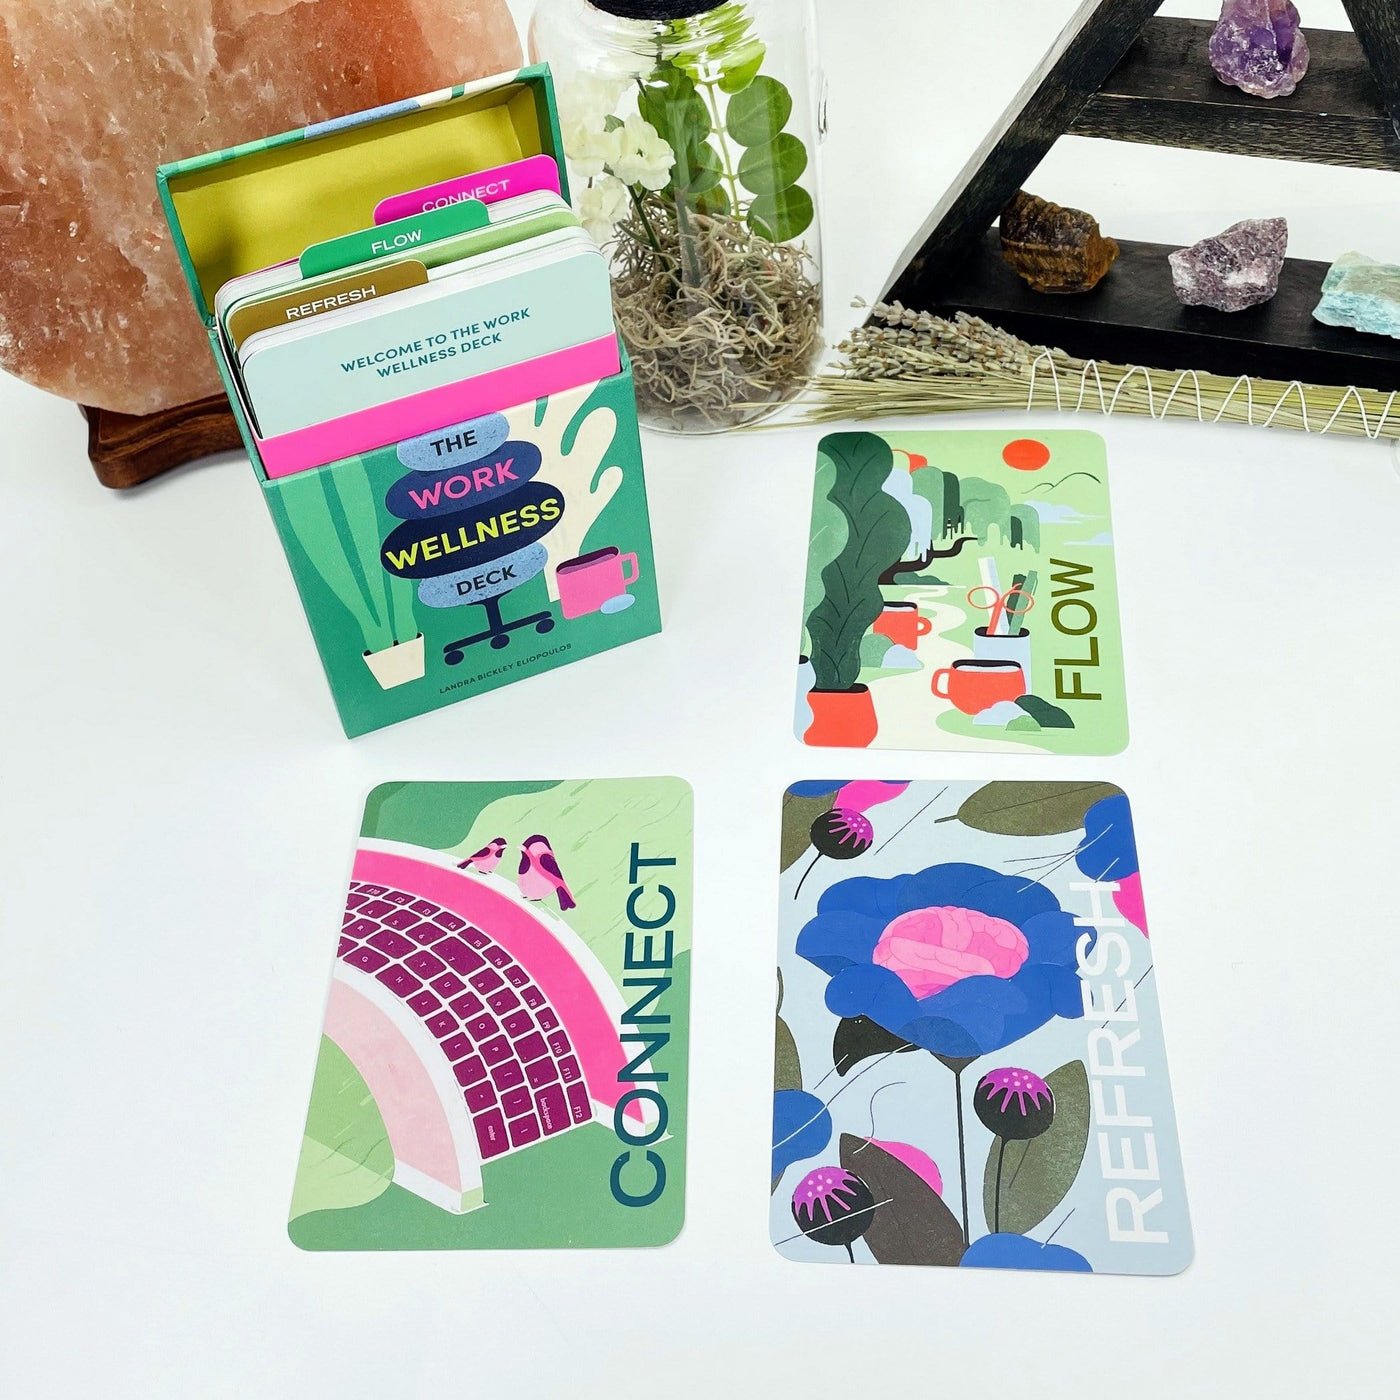 Restore a sense of well-being at work with this deck of 60 engaging exercises that are easy to do anytime, anywhere. Color-coded cards are organized into three categories: